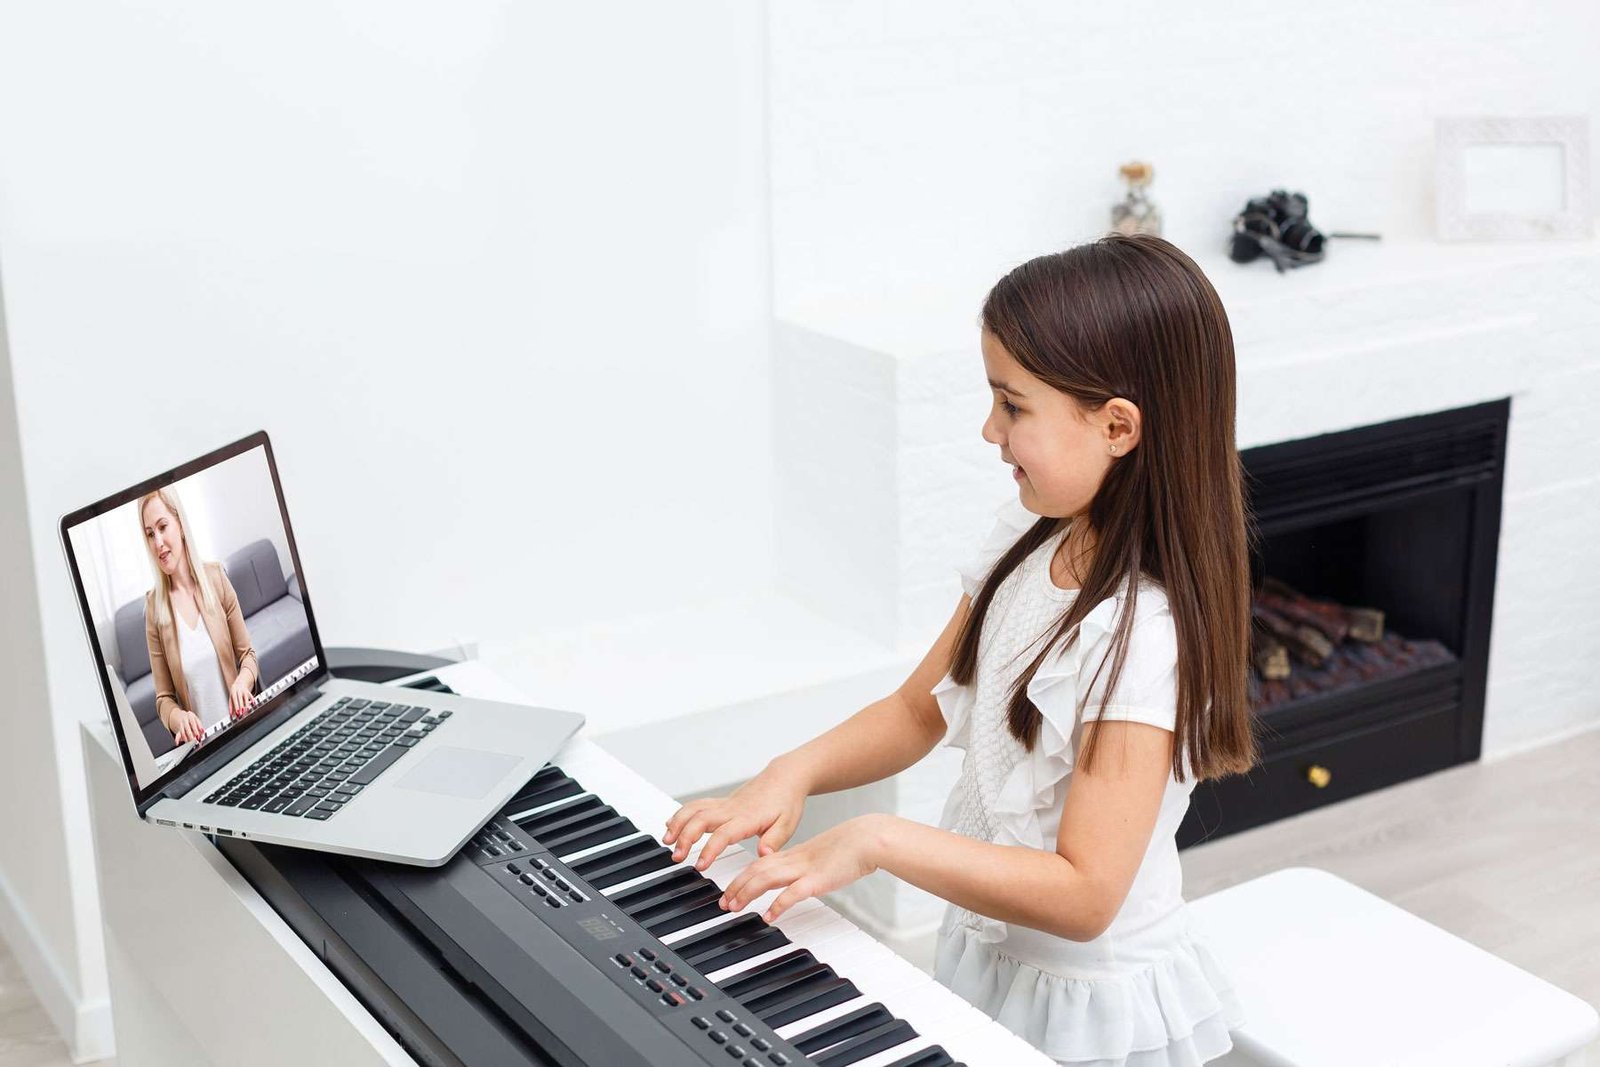 A beginner child learning how to play the piano via online